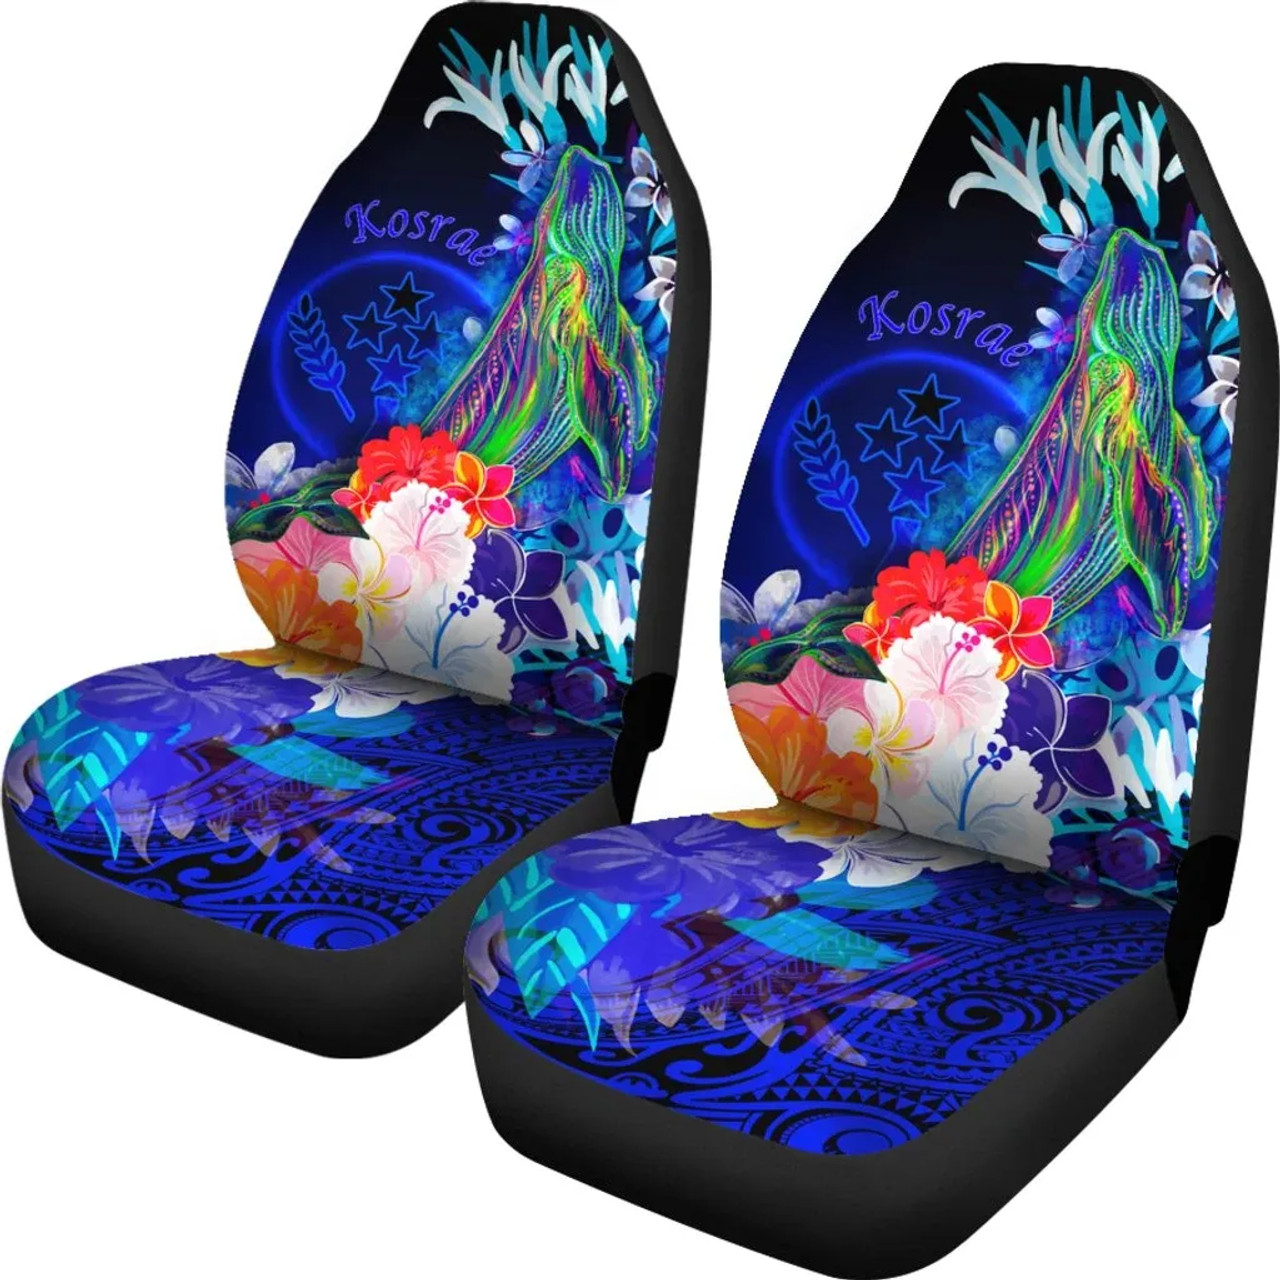 Kosrae Car Seat Cover - Humpback Whale with Tropical Flowers (Blue)